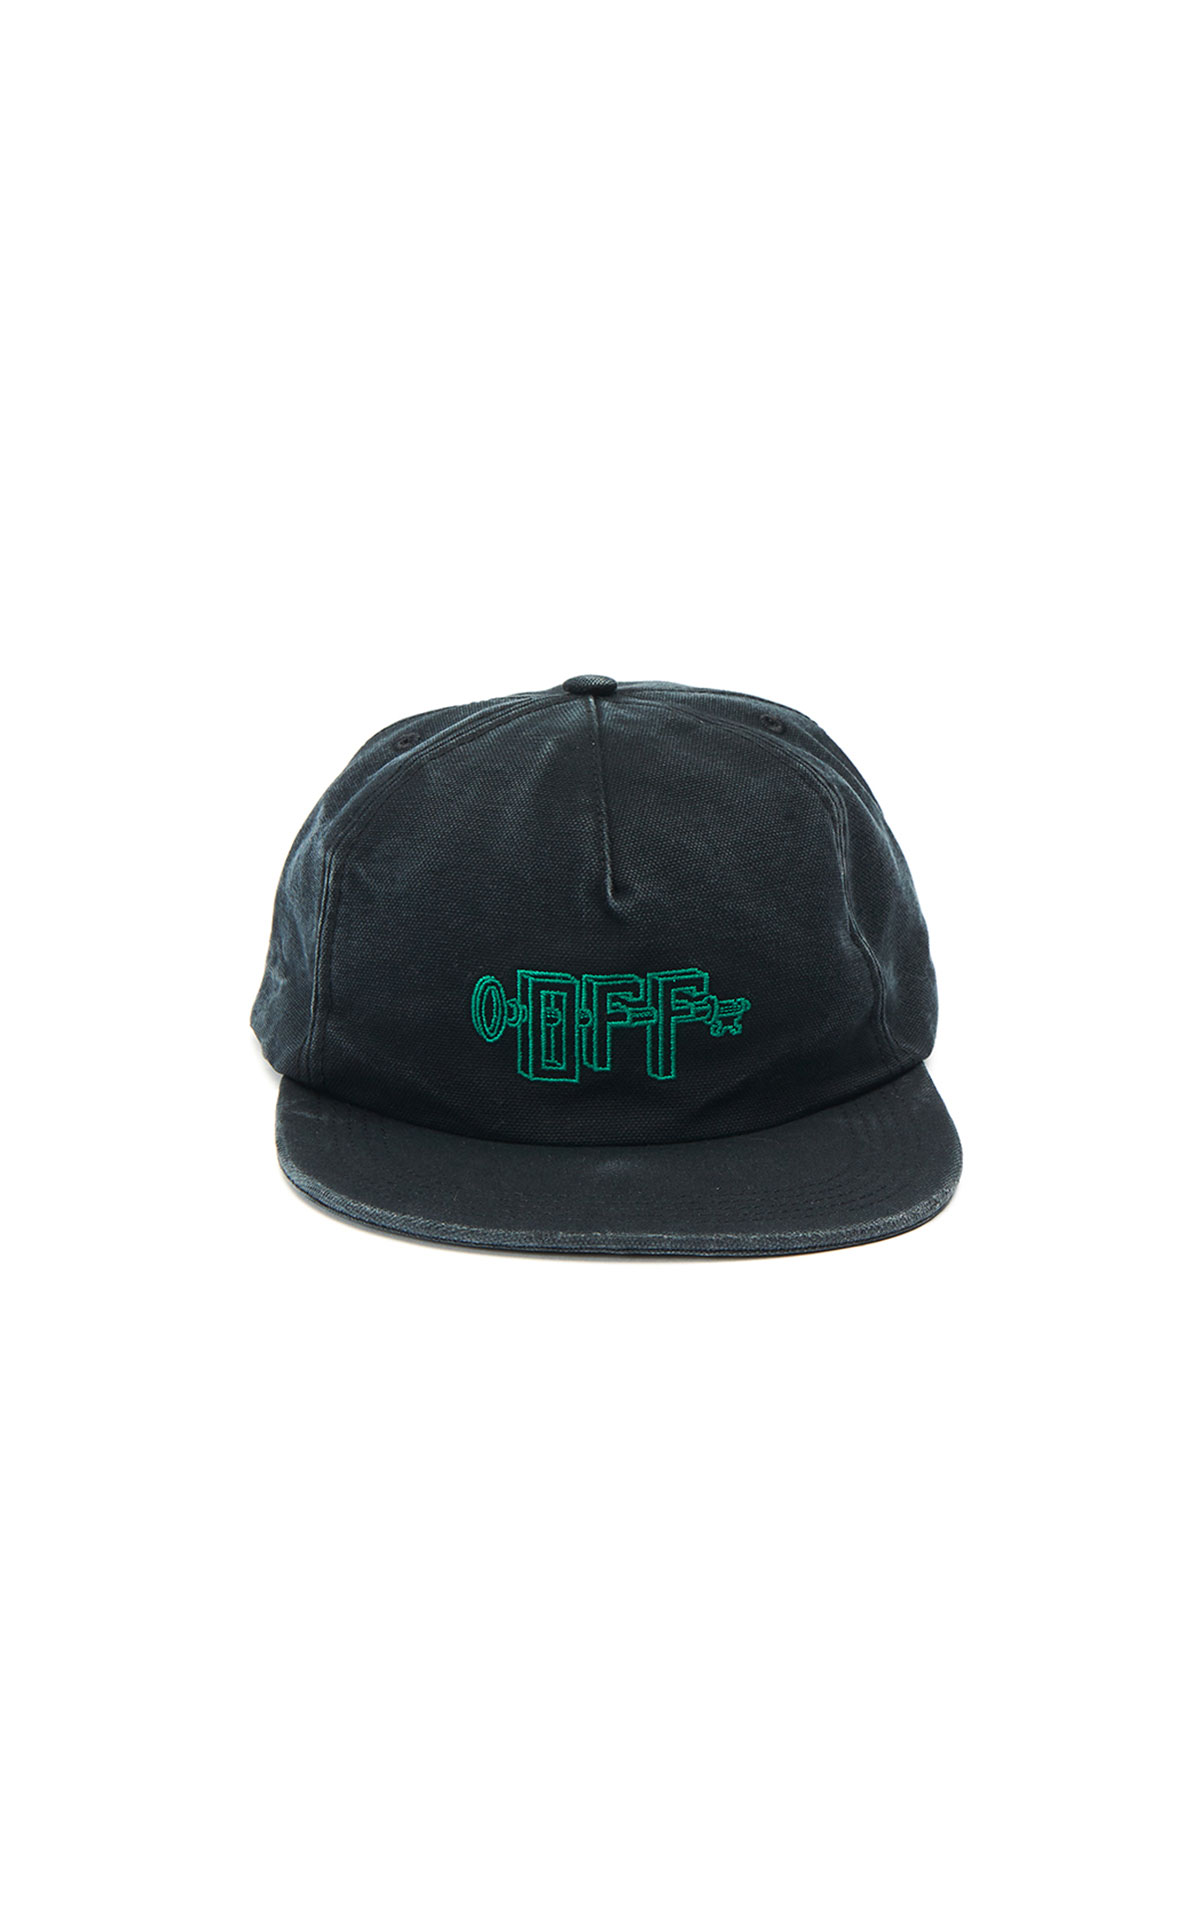 Off-White Cap black green from Bicester Village